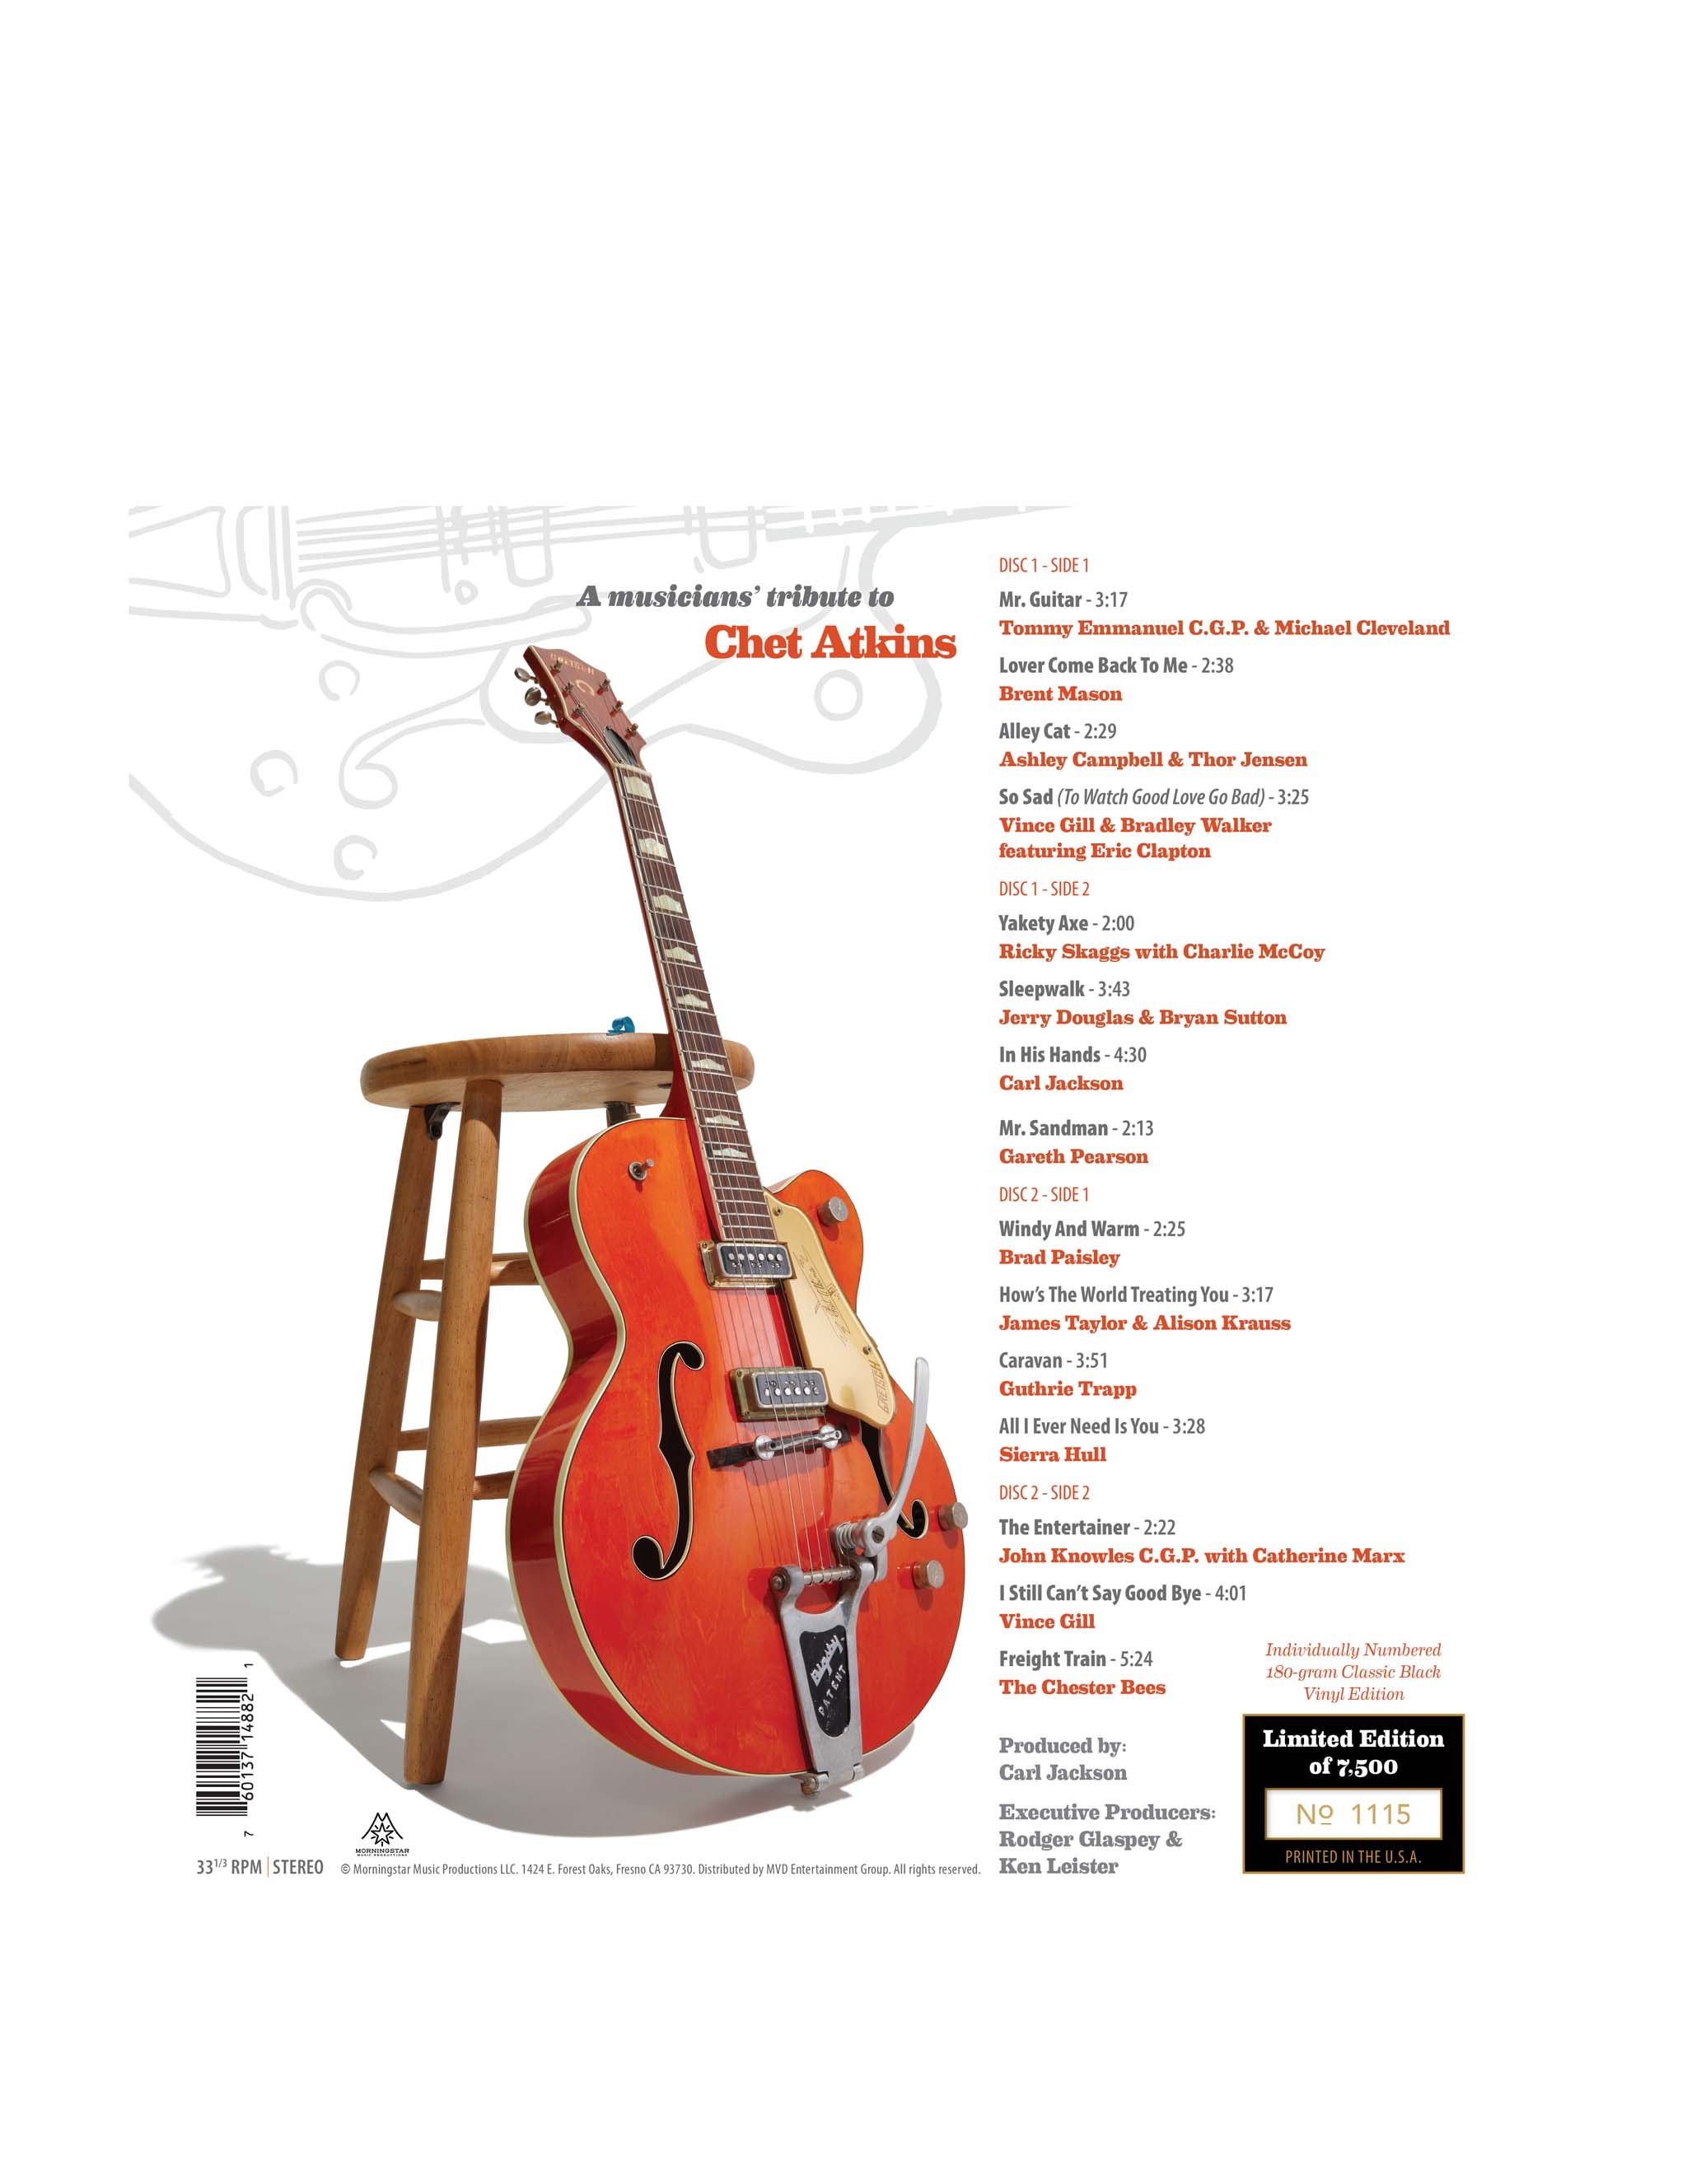 We Still Can’t Say Goodbye – A Musicians' Tribute to Chet Atkins Collectors Edition Orange Set (LP + DVD)